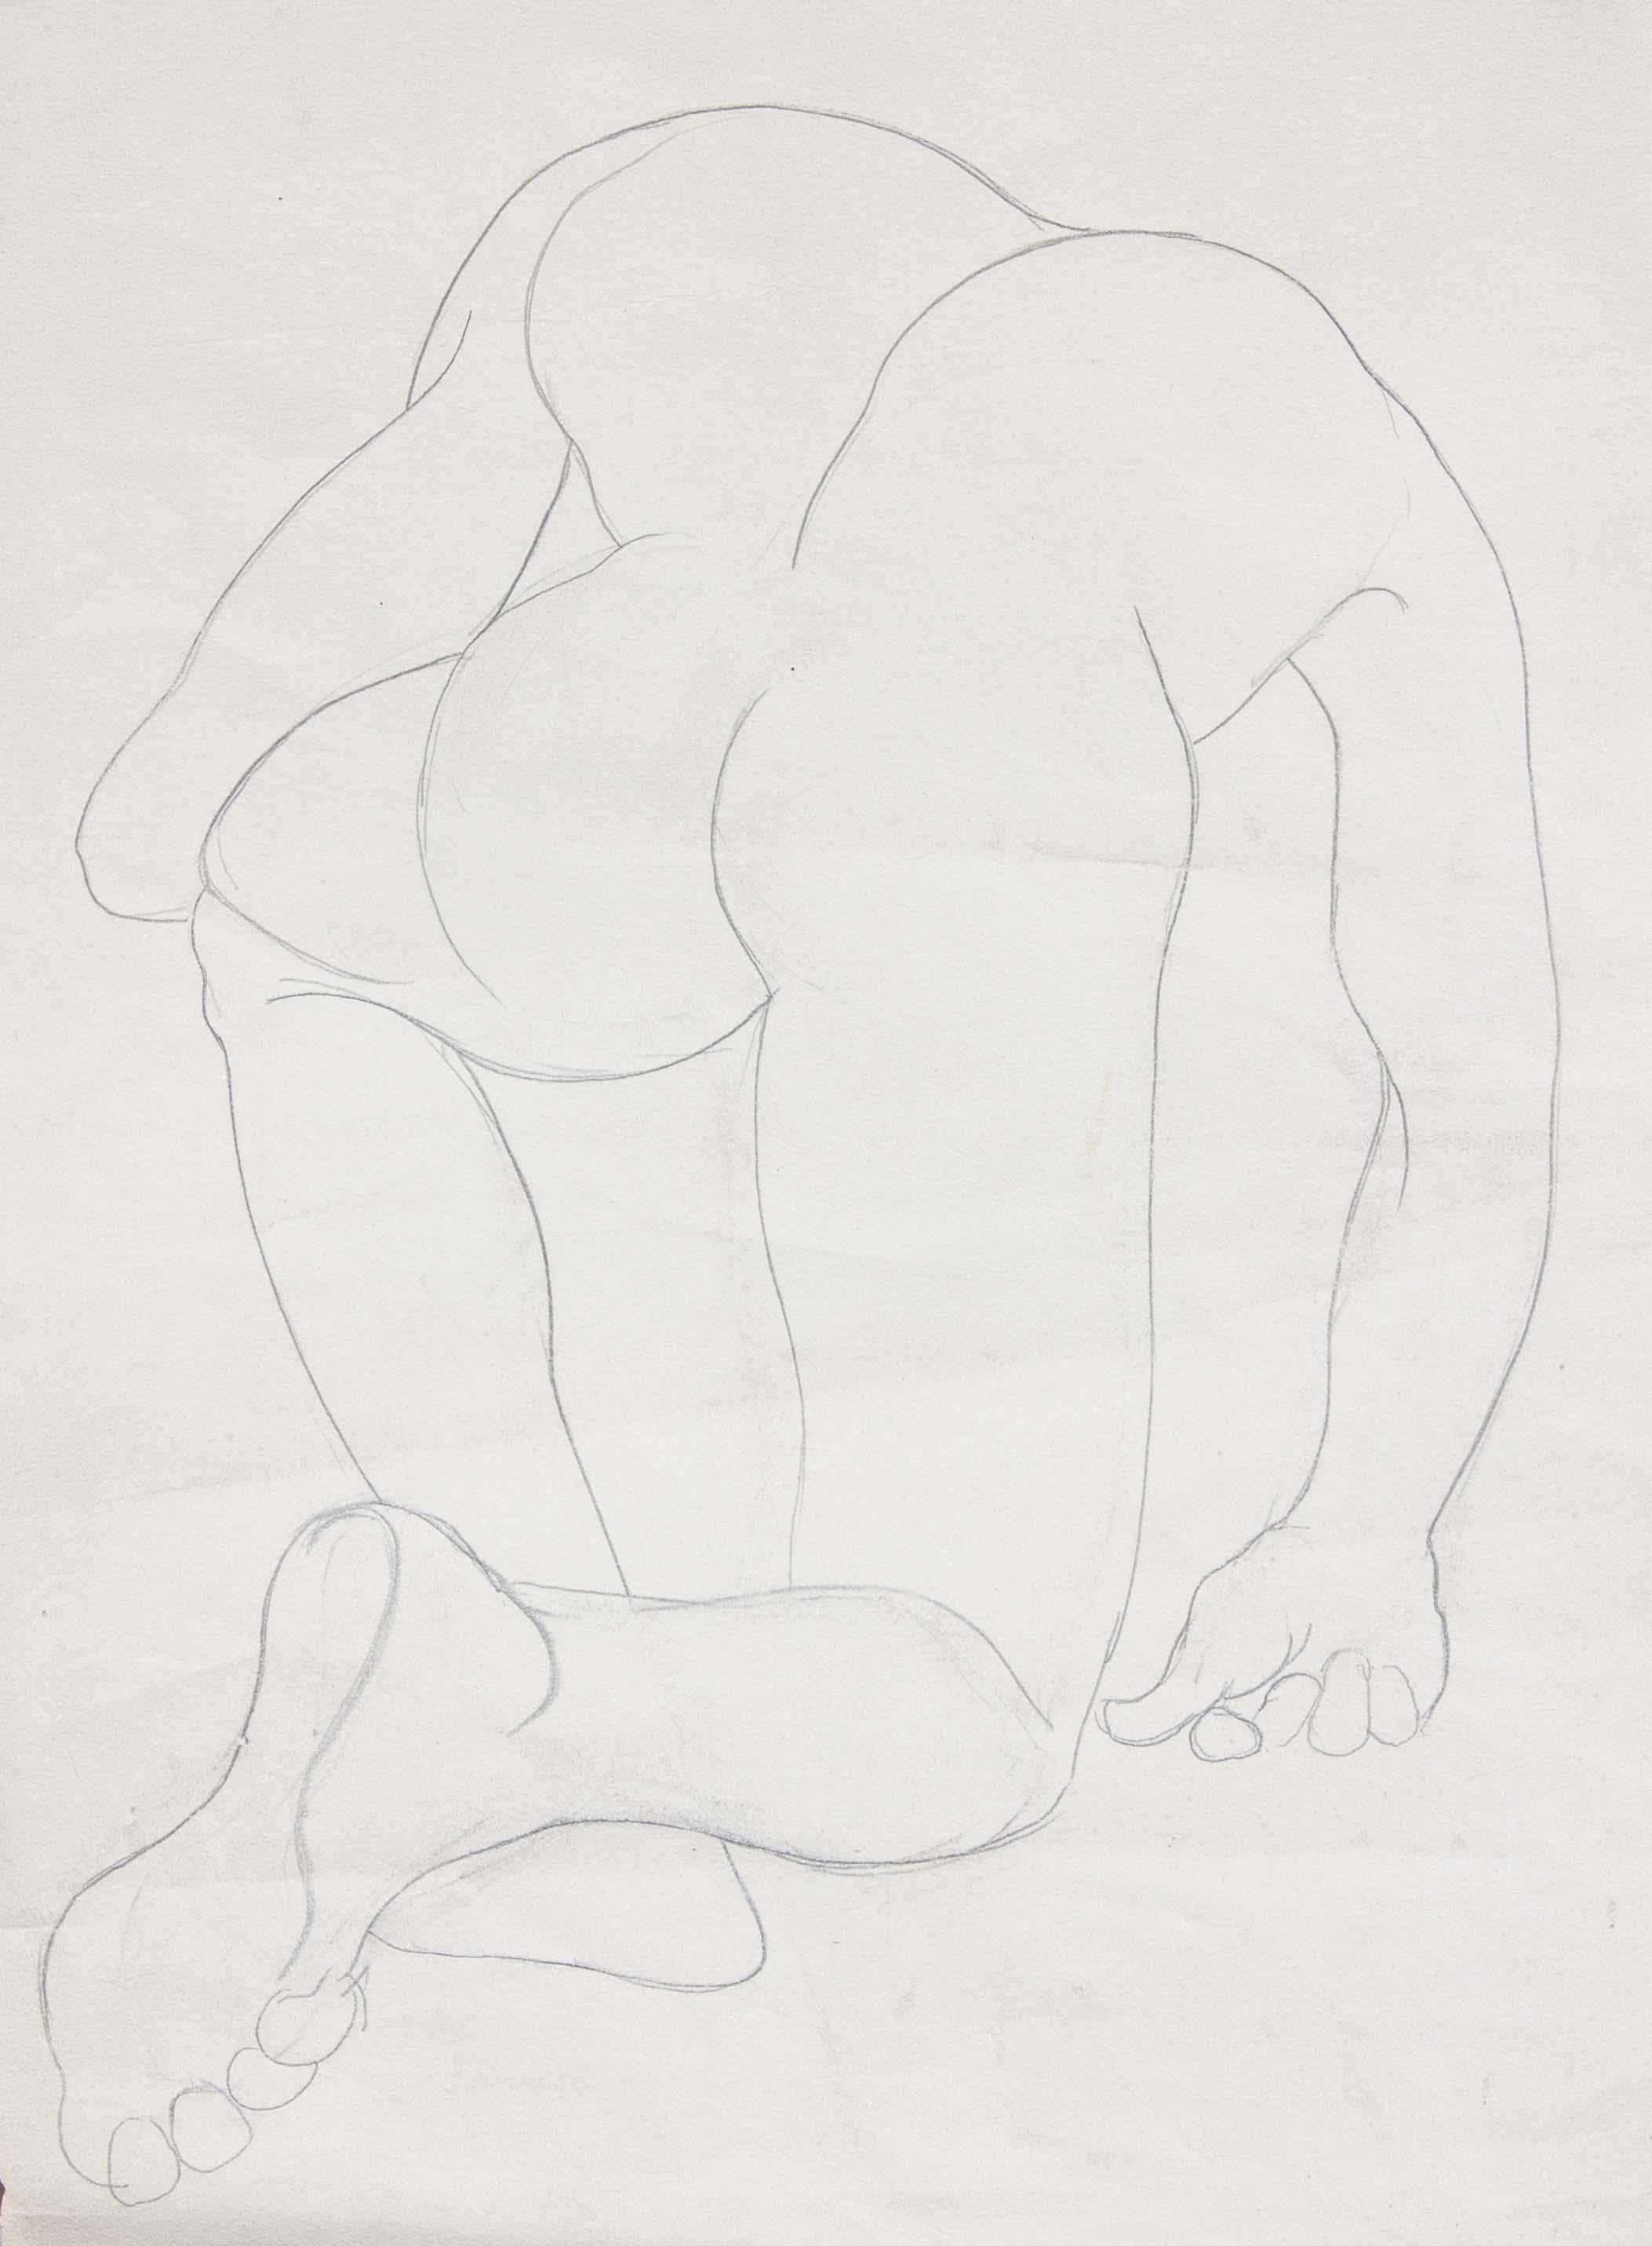 Two male  nude studies by Tony Sisti. Sisti was a master draftsman. With just a few lines he captures the moment. Sisti was a professional boxer and an accomplished artist. 

A long-time painter and teacher in Buffalo, New York, Anthony 